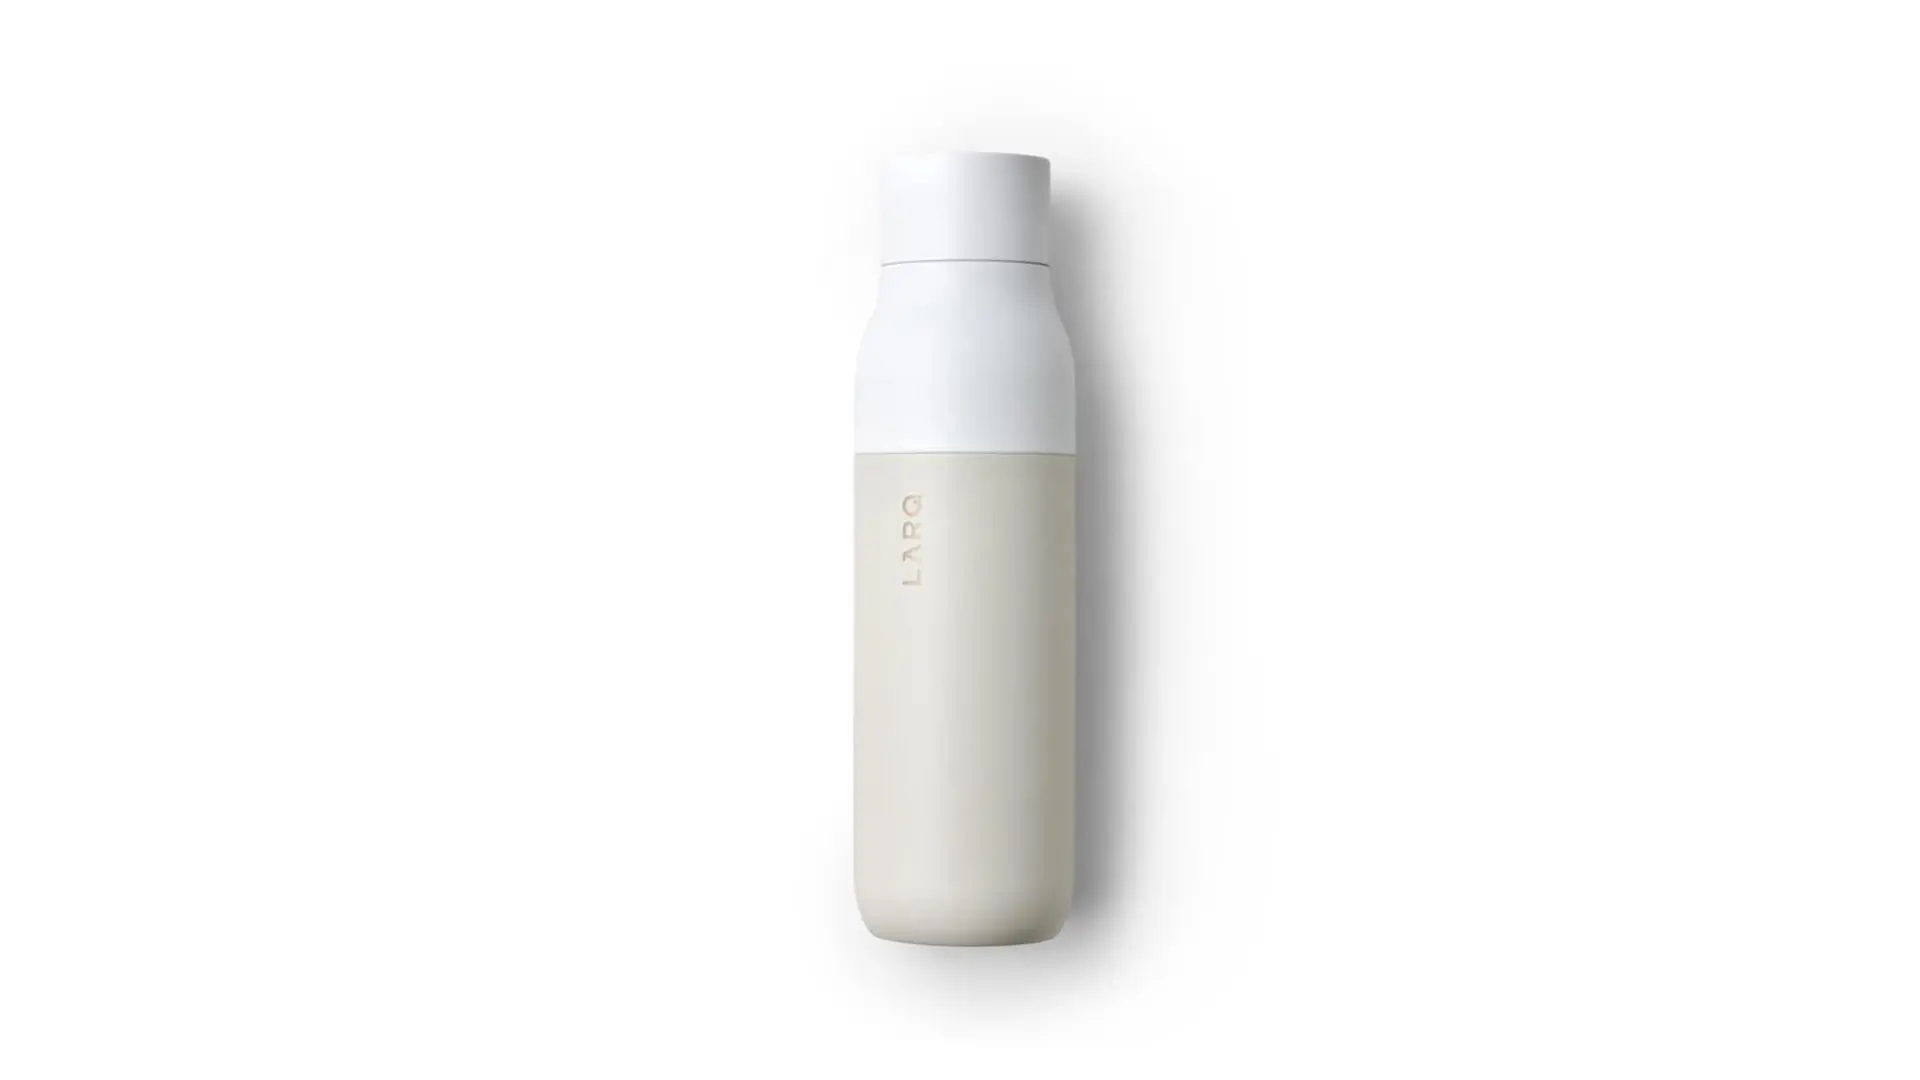 LARQ Bottle is a sustainable and travel-friendly bottle, which uses UV light technology to kill harmful bacteria and purify water.